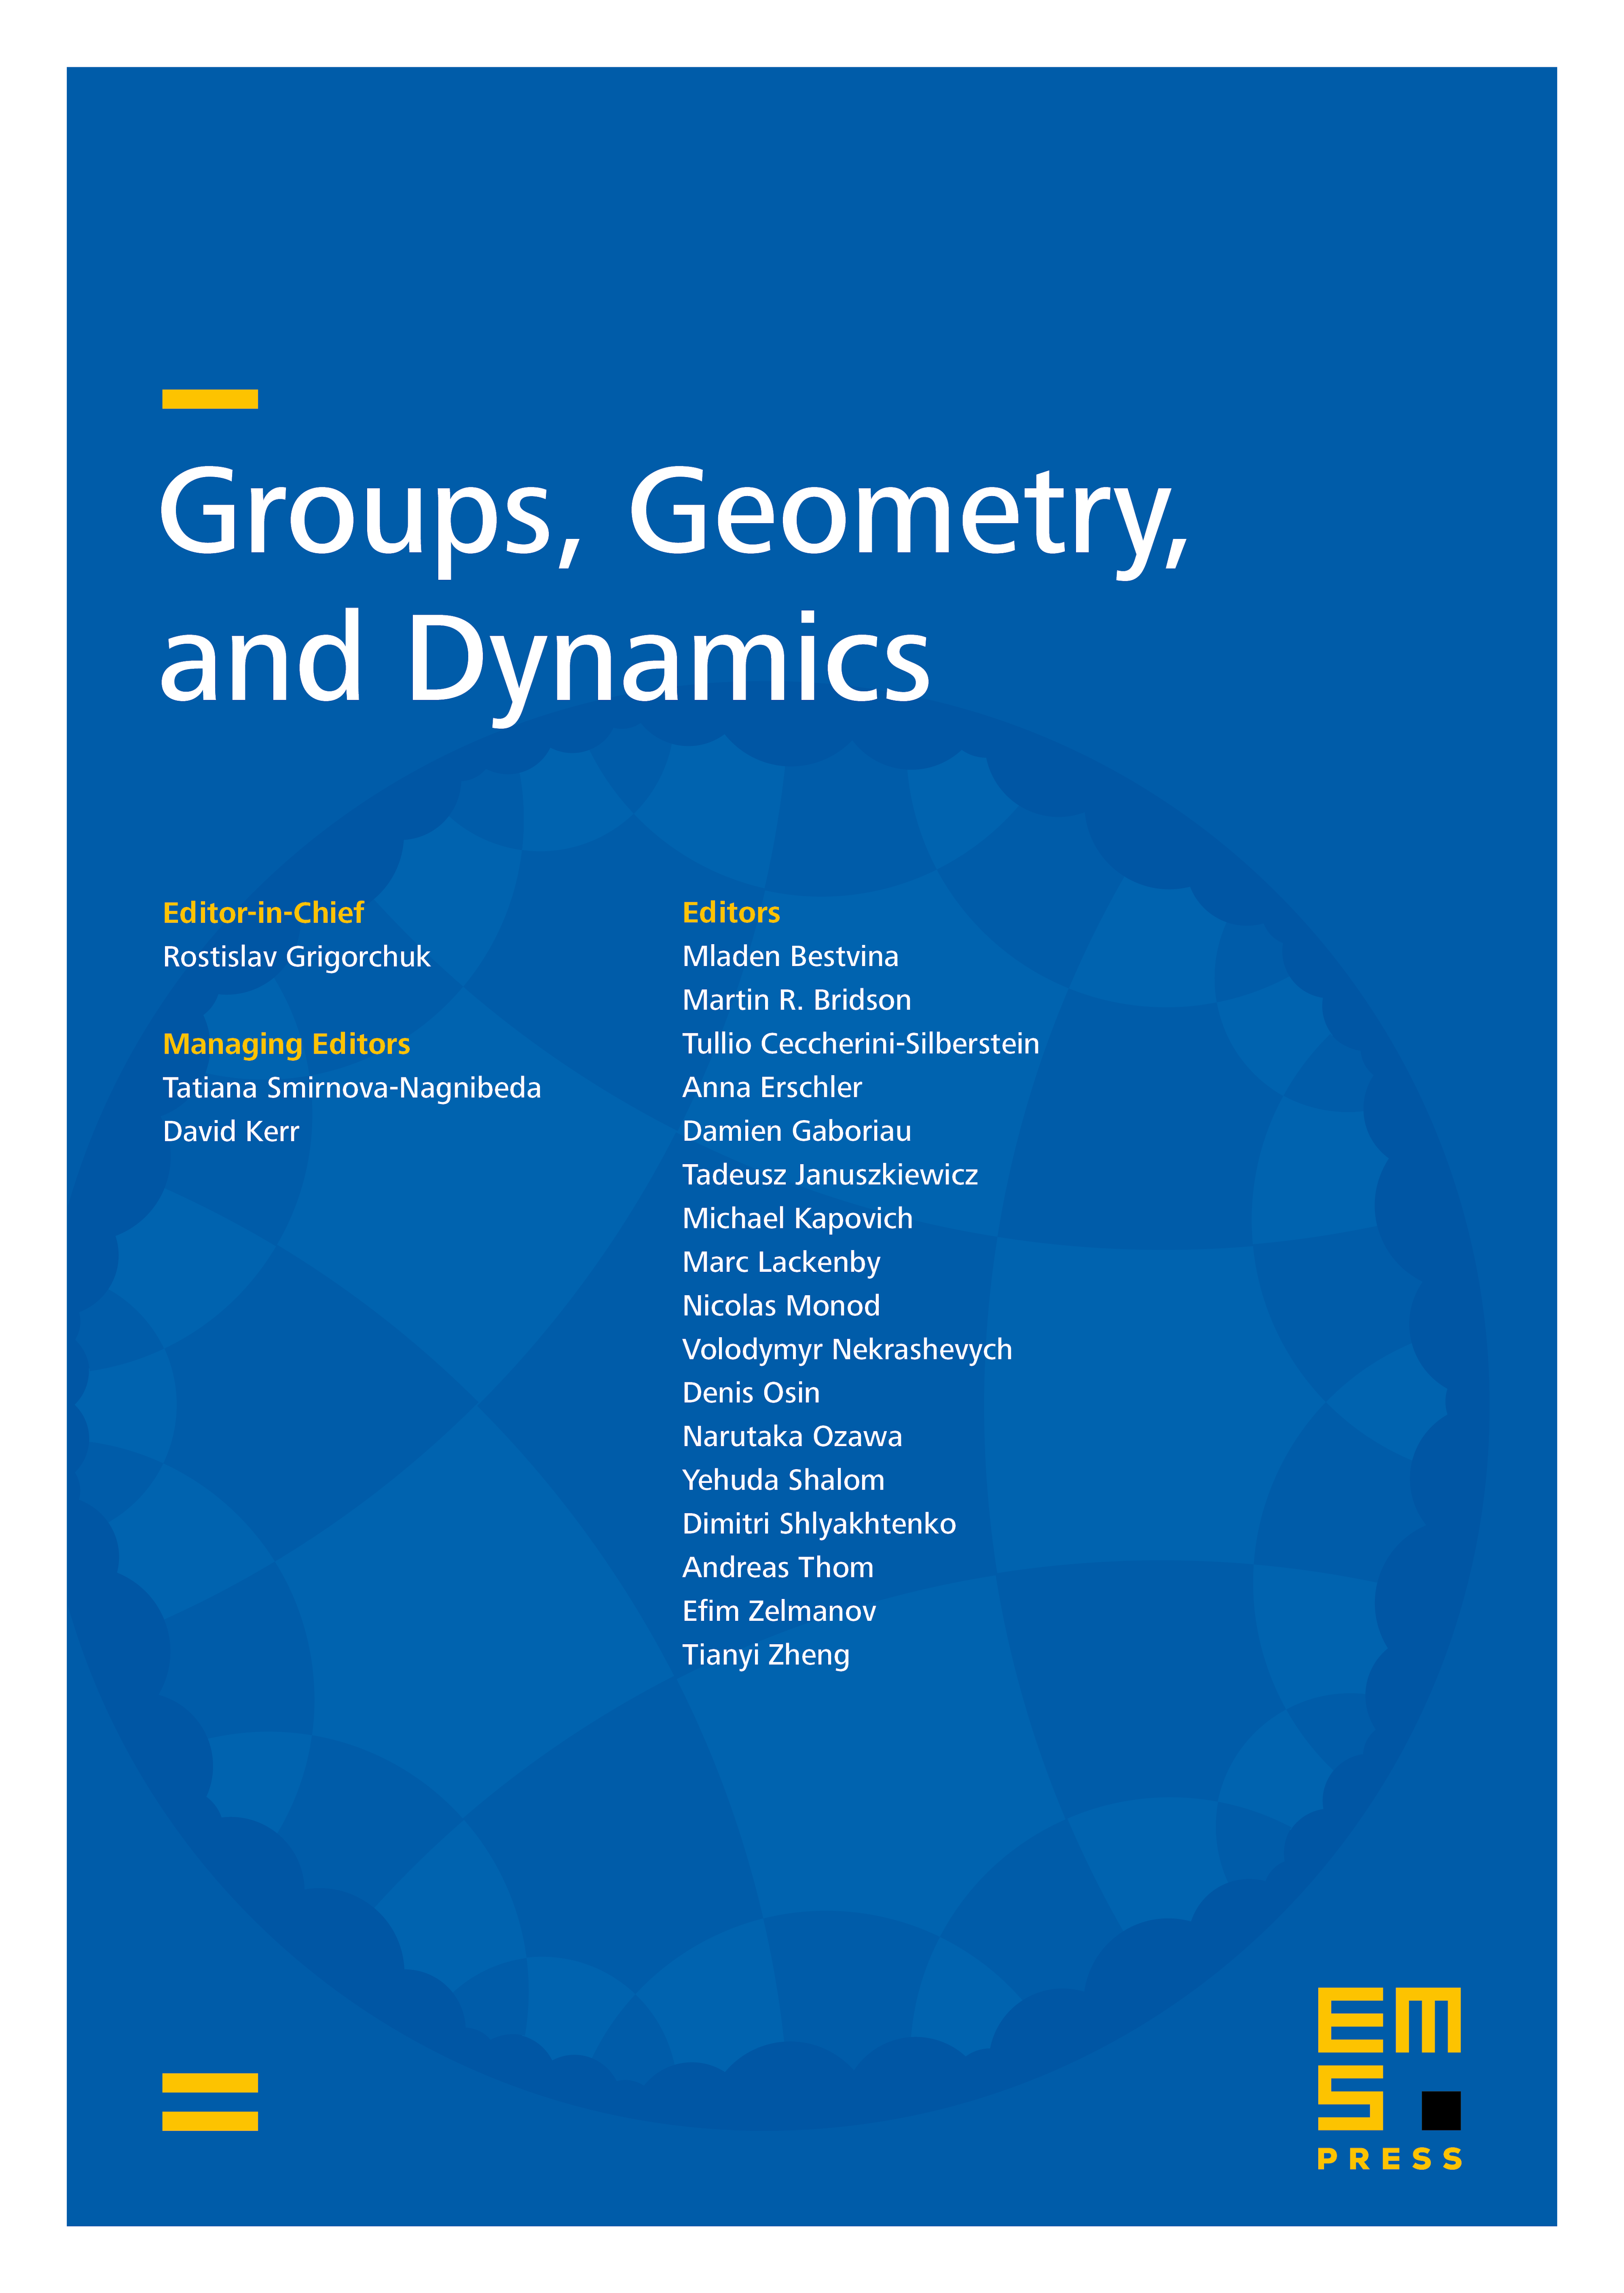 Grothendieck rigidity of 3-manifold groups cover